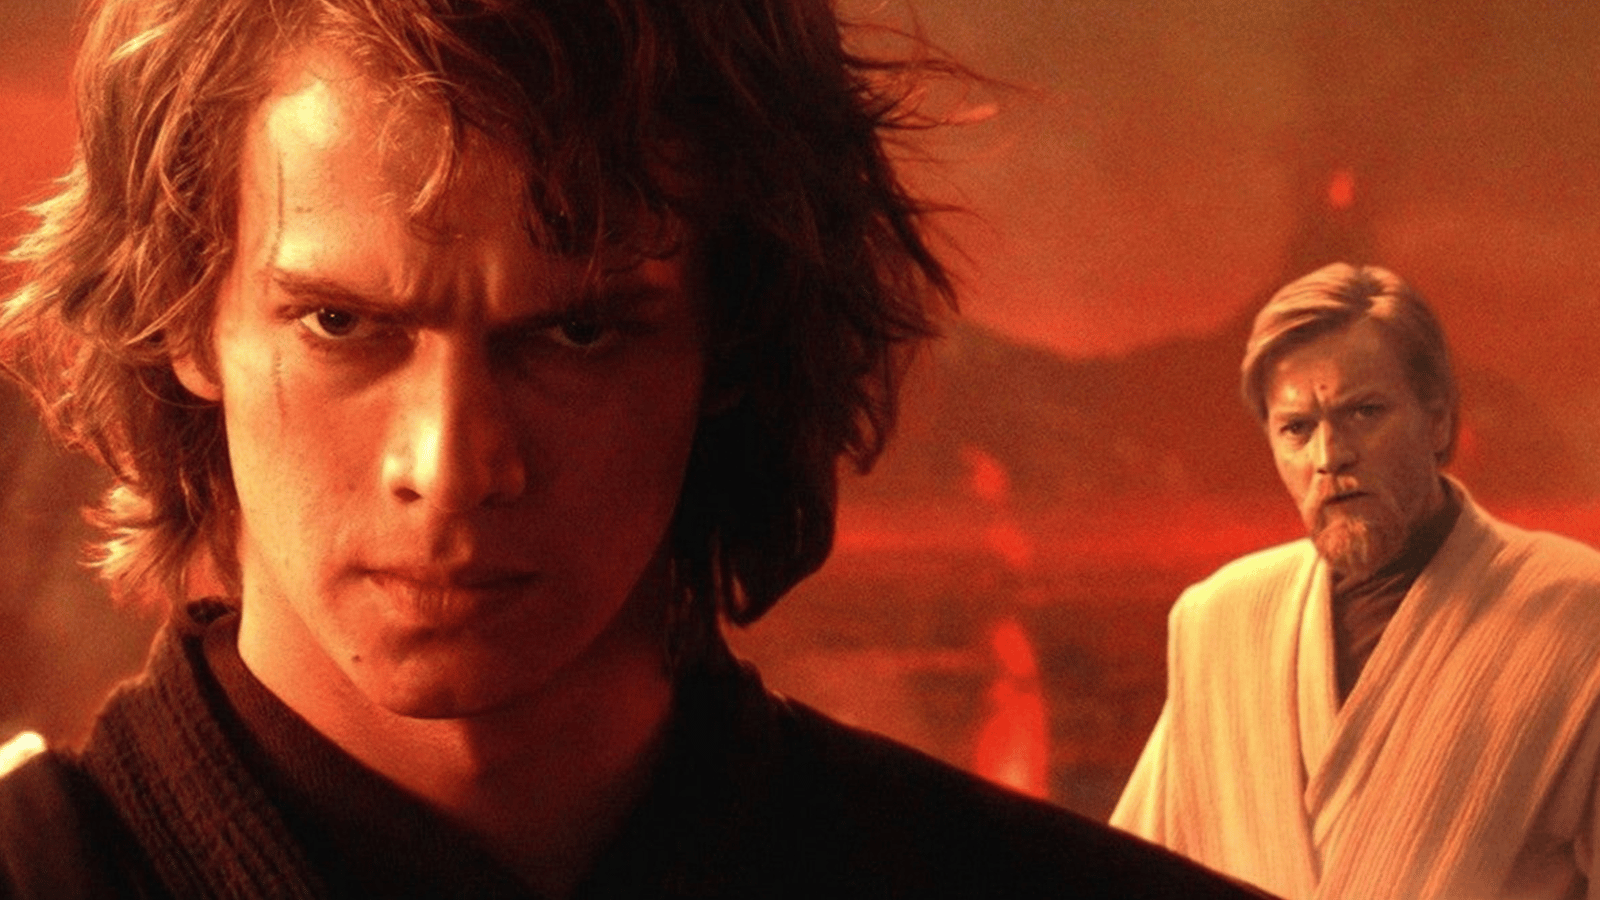 Anakin and Obi-Wan prepare to battle in Star Wars: Revenge of the Sith.